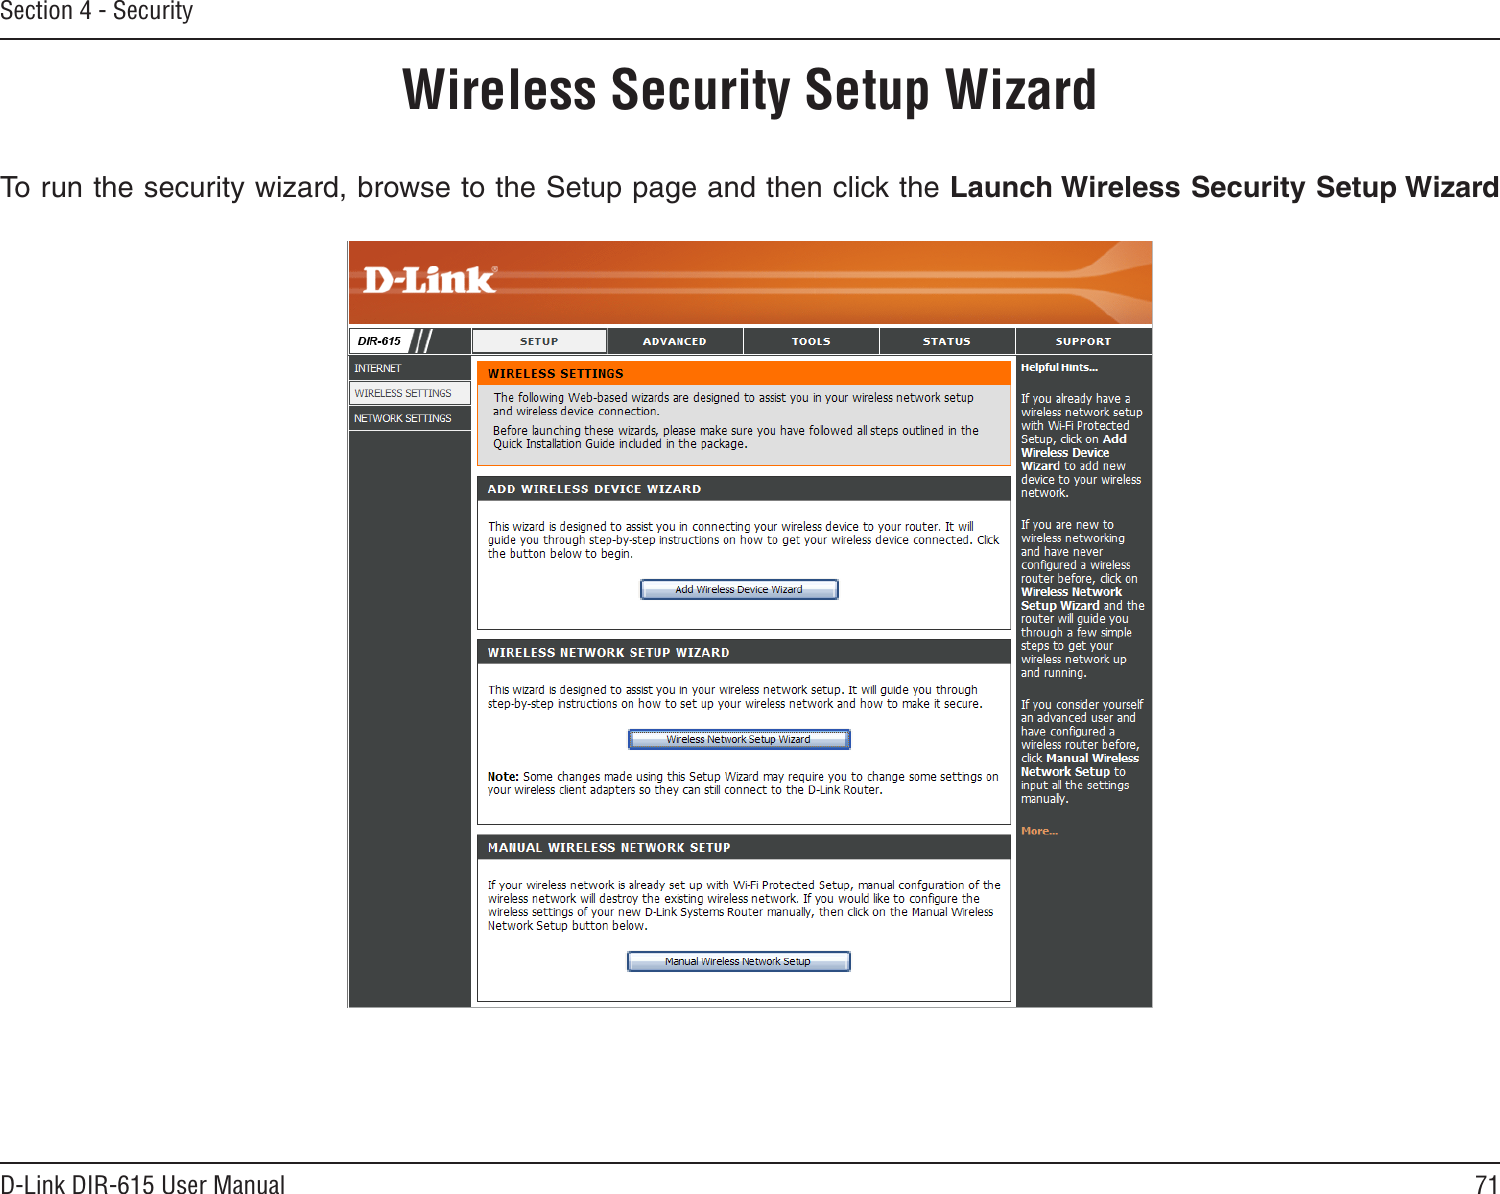 71D-Link DIR-615 User ManualSection 4 - SecurityWireless Security Setup WizardTo run the security wizard, browse to the Setup page and then click the Launch Wireless Security Setup Wizard 